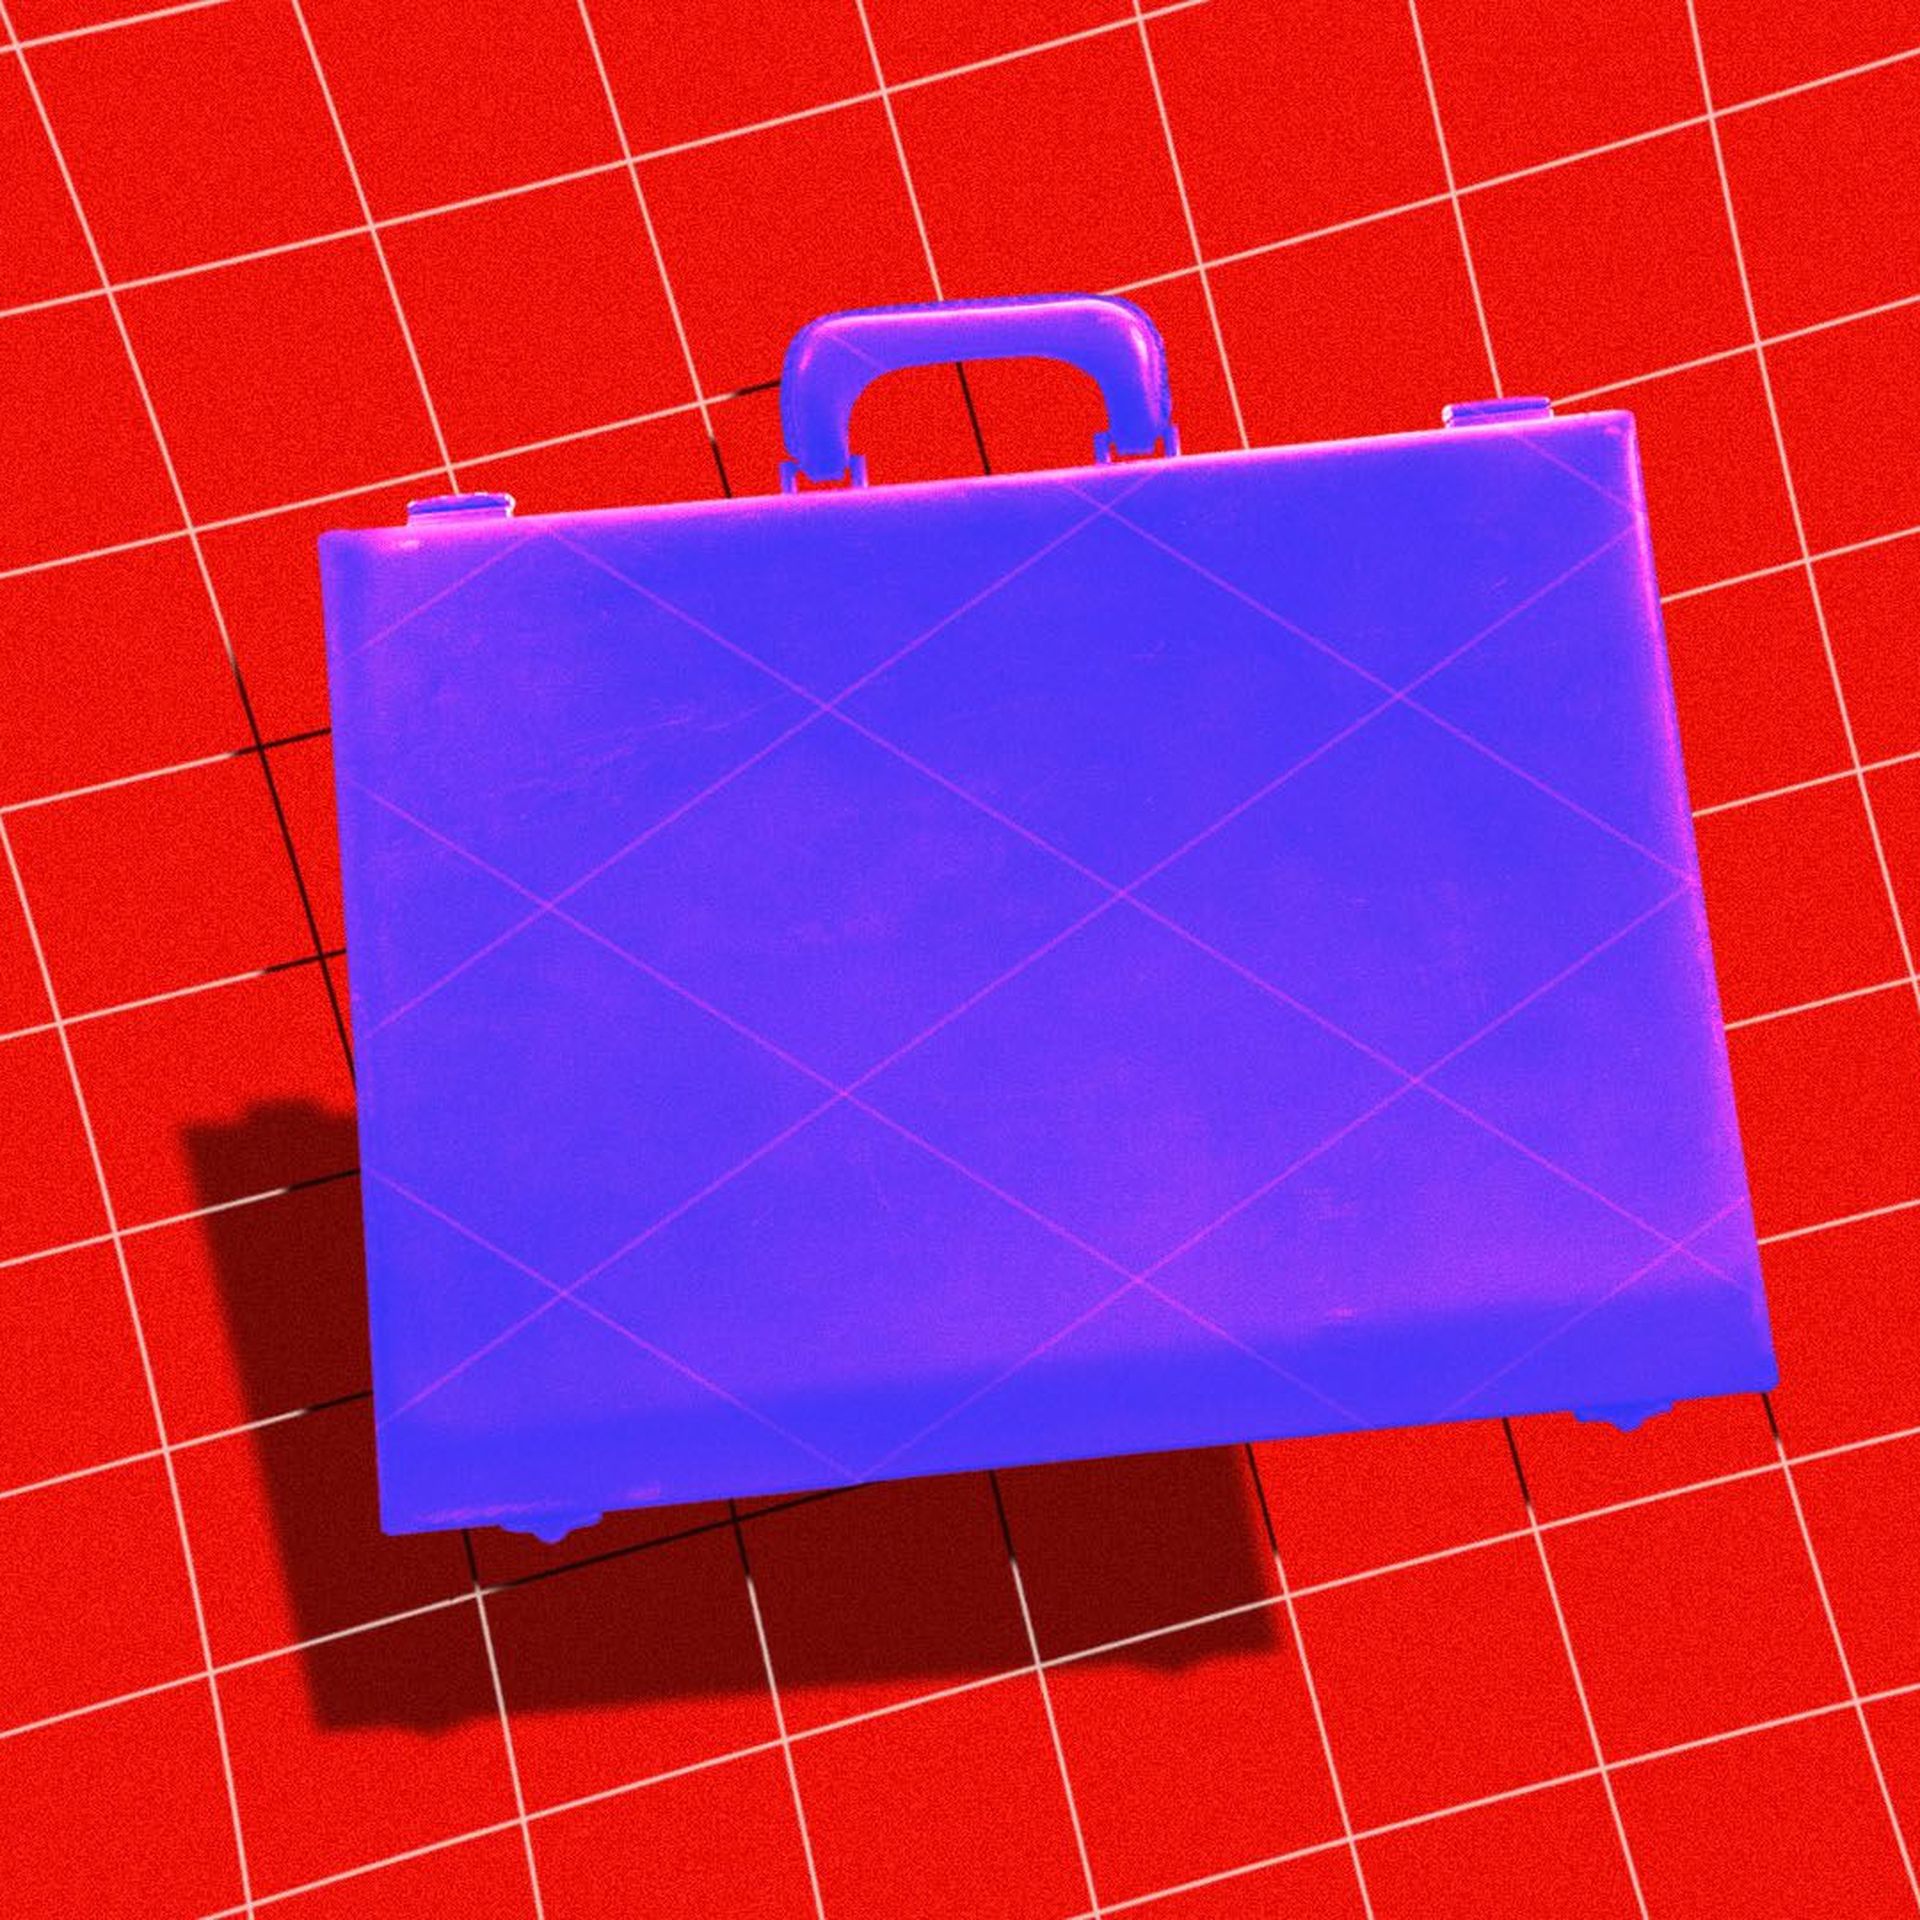 Illustration of a briefcase in the middle of a net